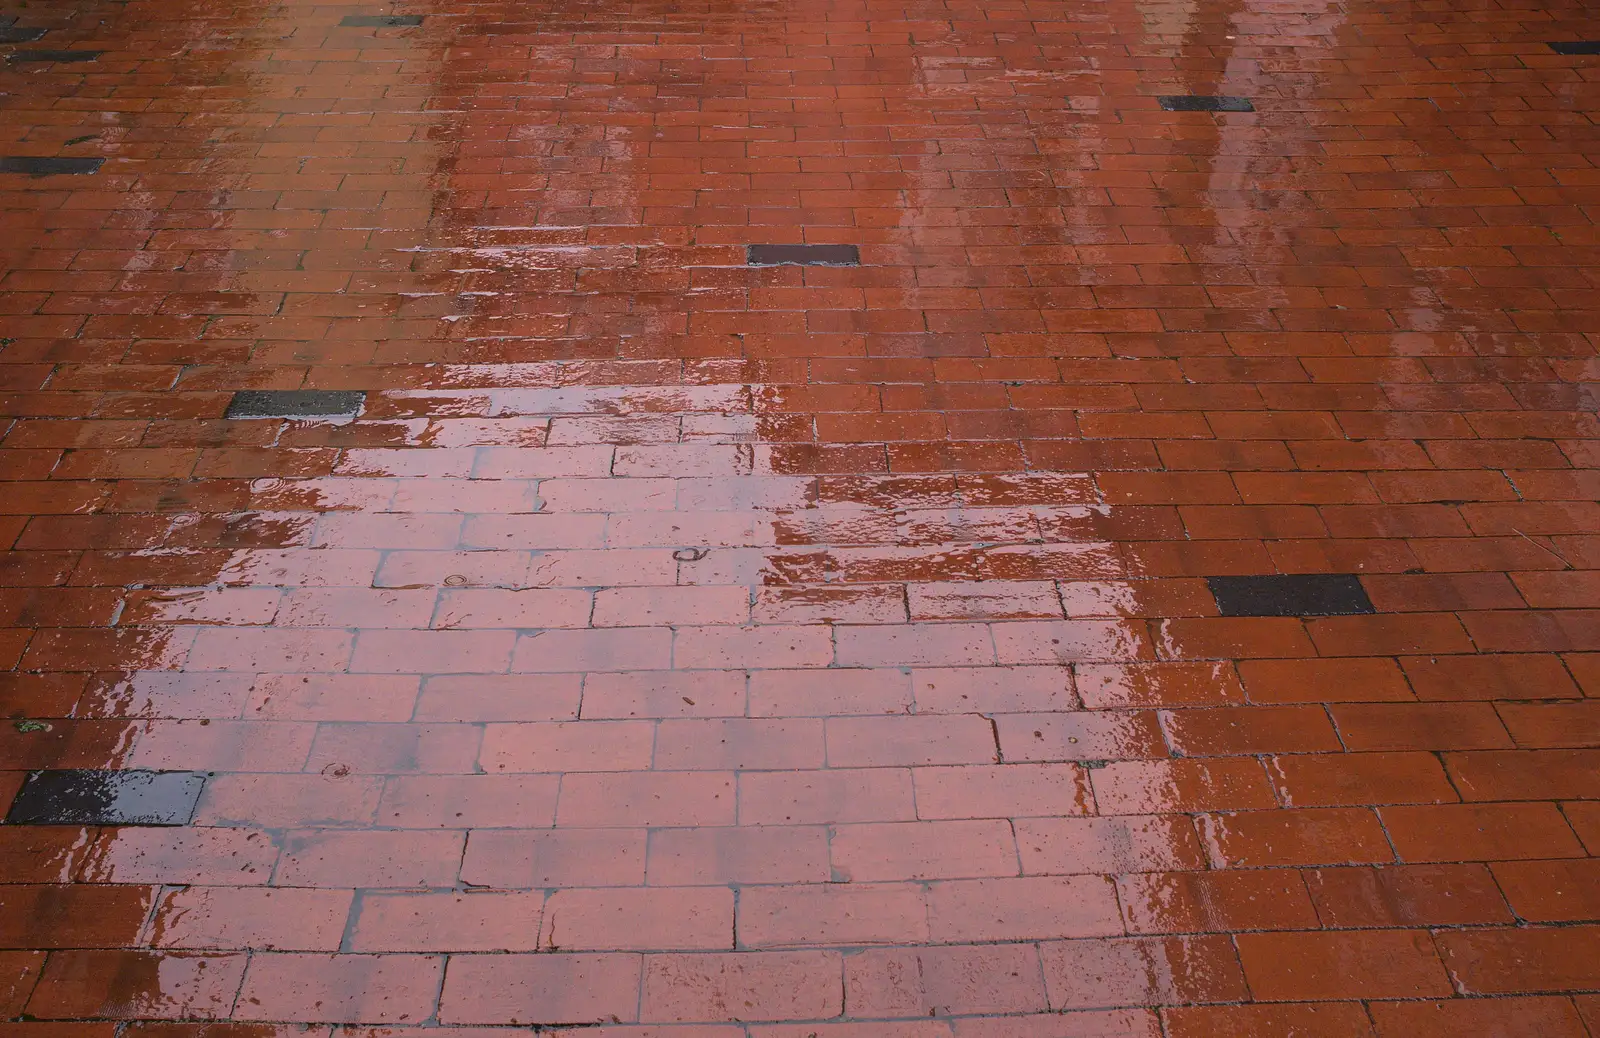 Wet shiny bricks, from Bramford Dereliction and Marconi Demolition, Chelmsford - 12th March 2013